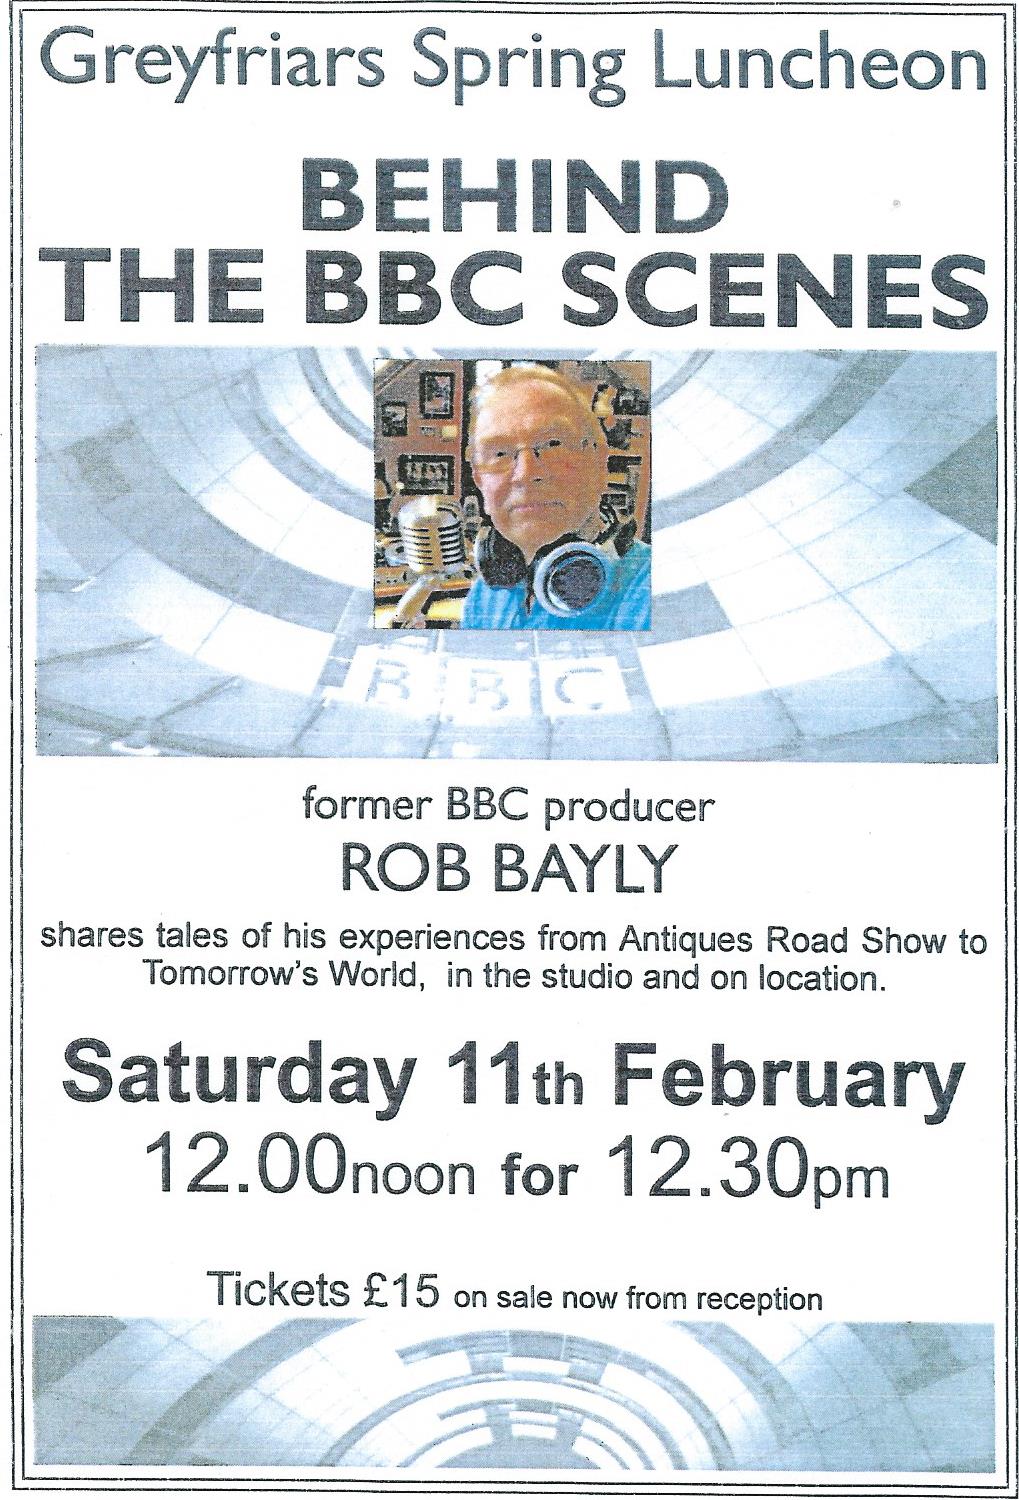 Rob Bayly speaker behind the BBC scenes